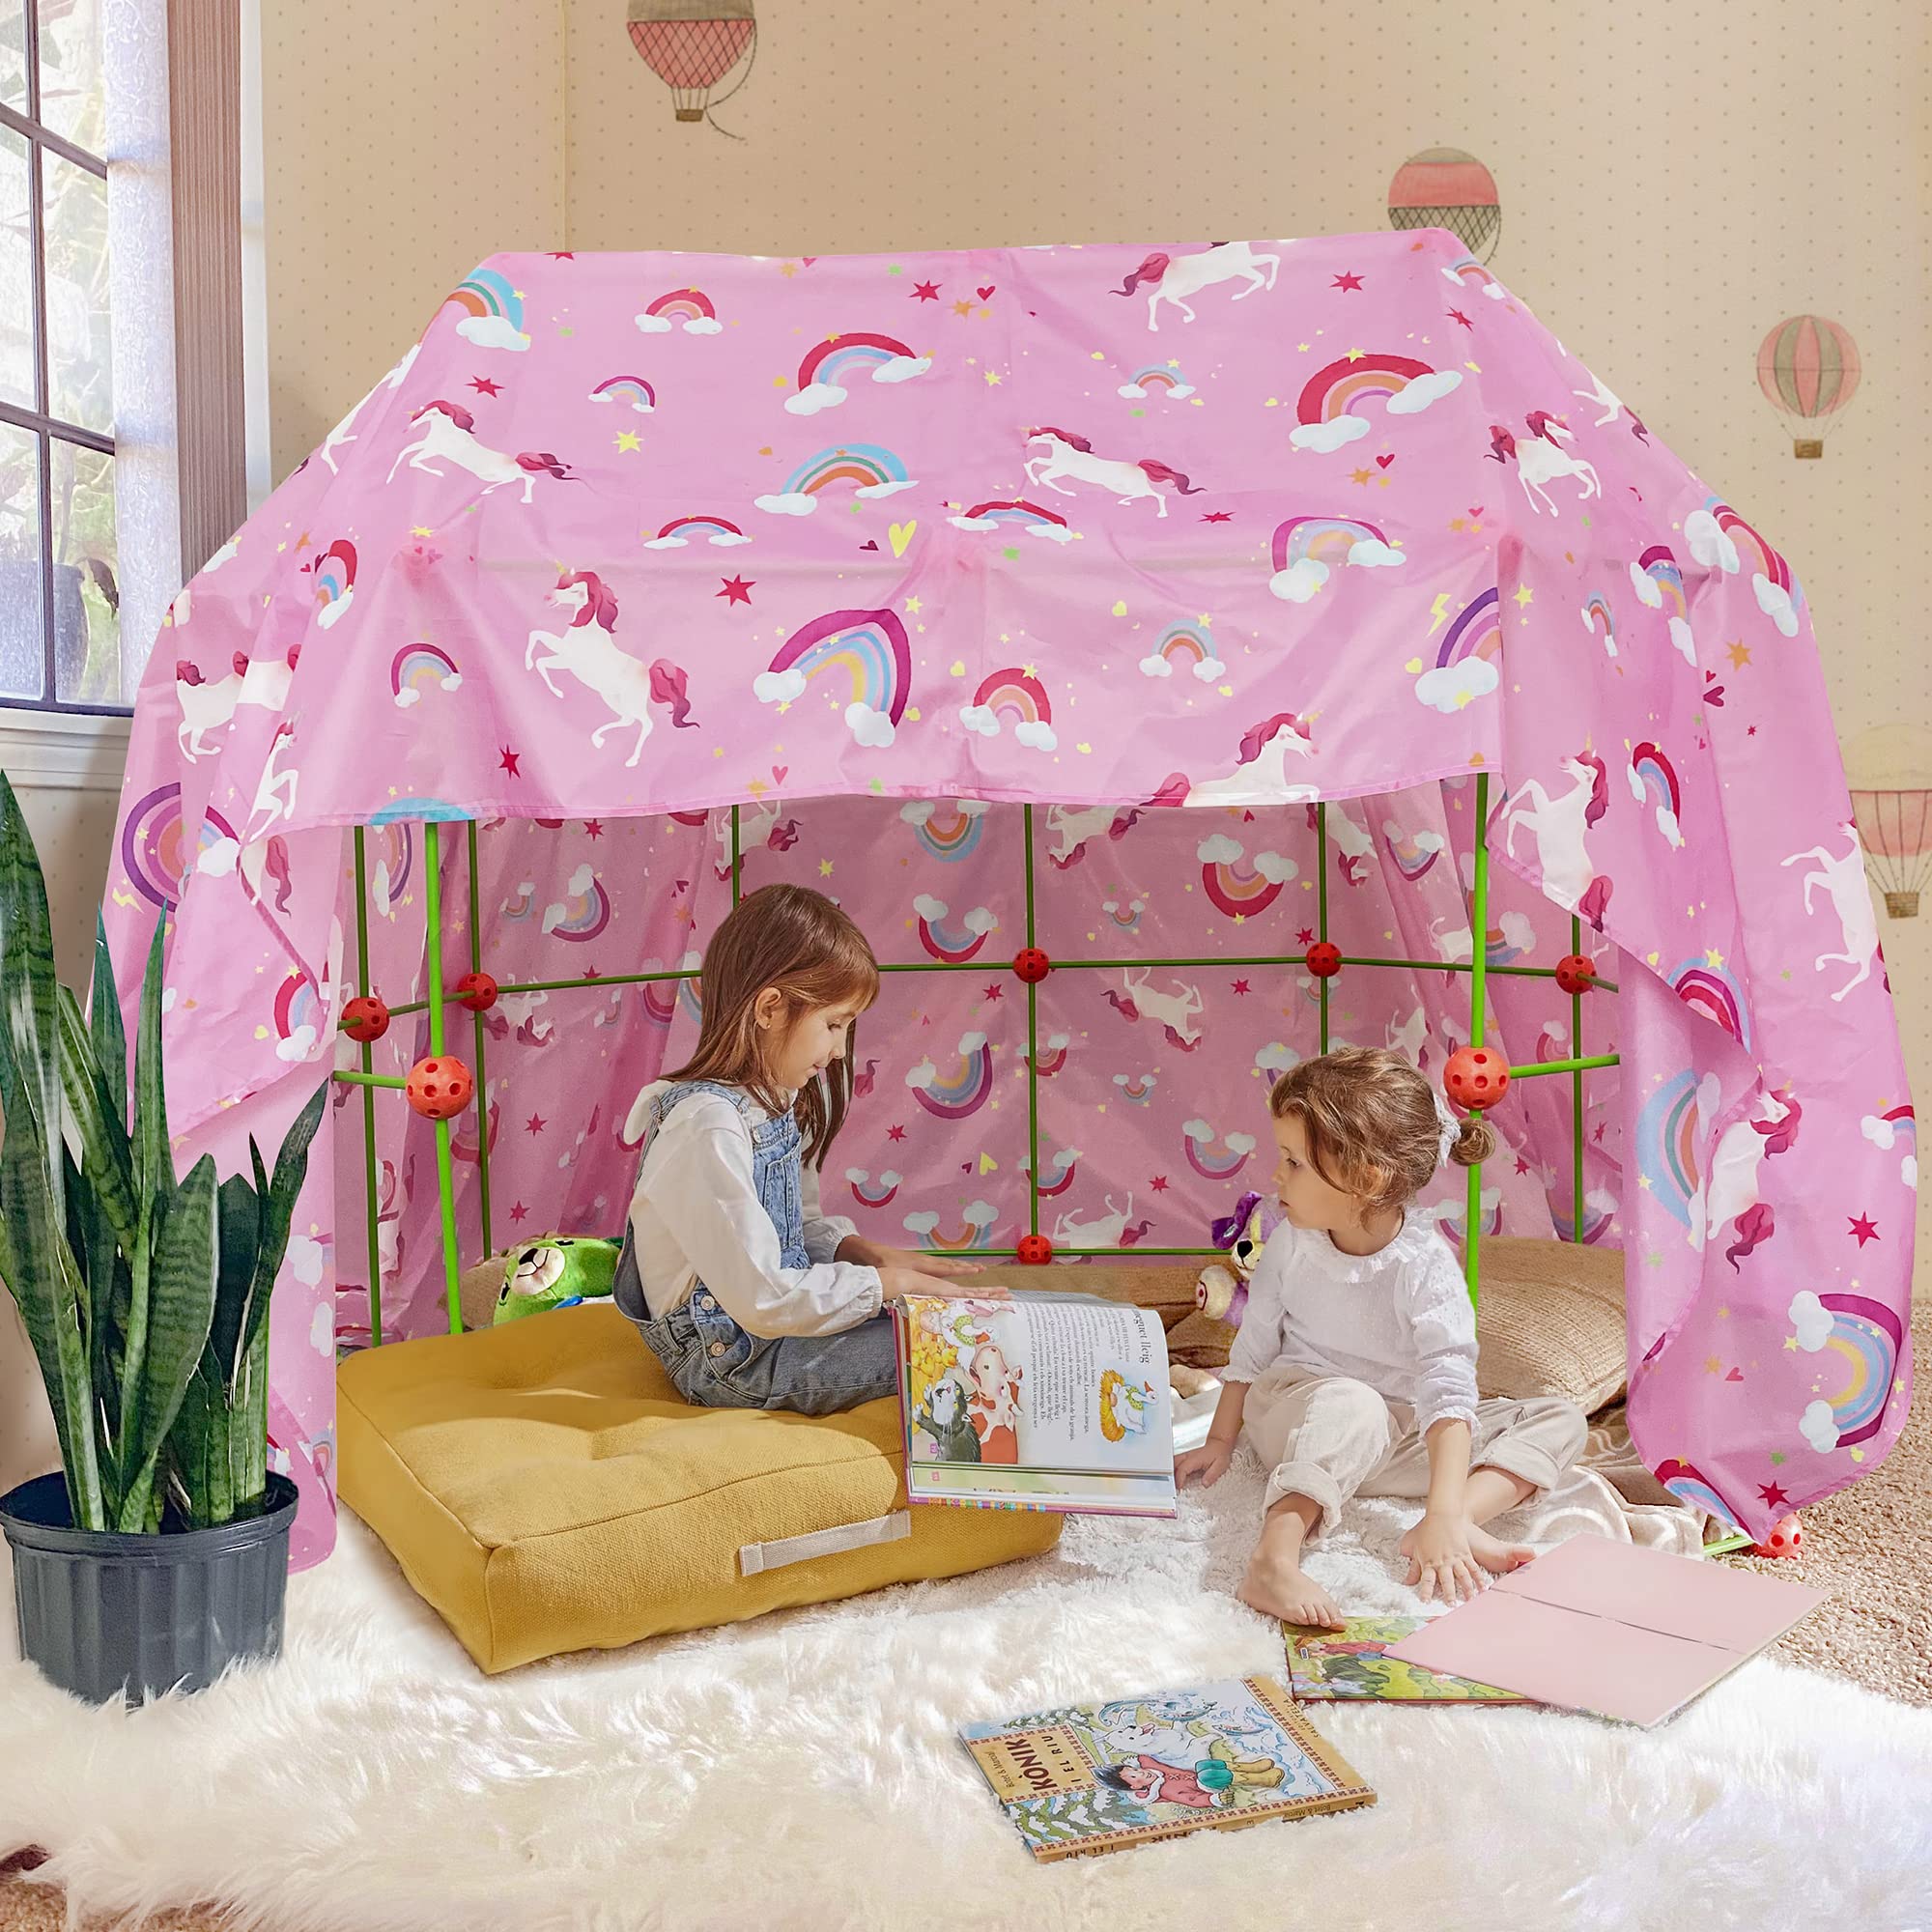 Blanket Fort for Kids, Fits Fort Building Kit, Kids Fort, Pink Blanket Fort  for Indoor, Kids Toy for 3,4, 5,6,7,8 Years Old Boy & Girls,126 L x 94 W